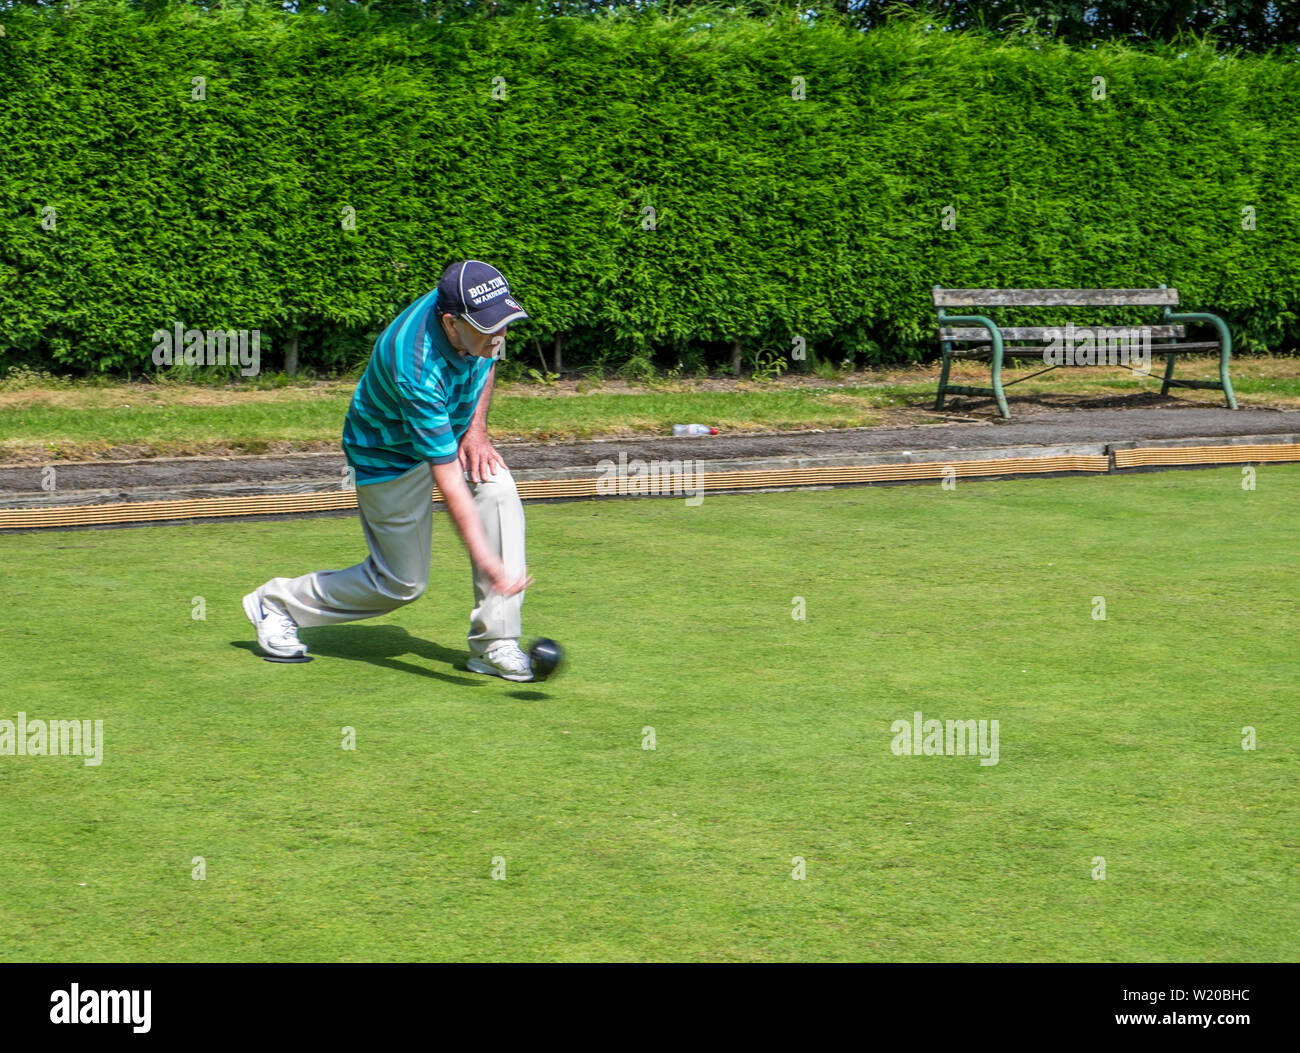 Crown Green Bowling Club Comprtitions Stock Photo